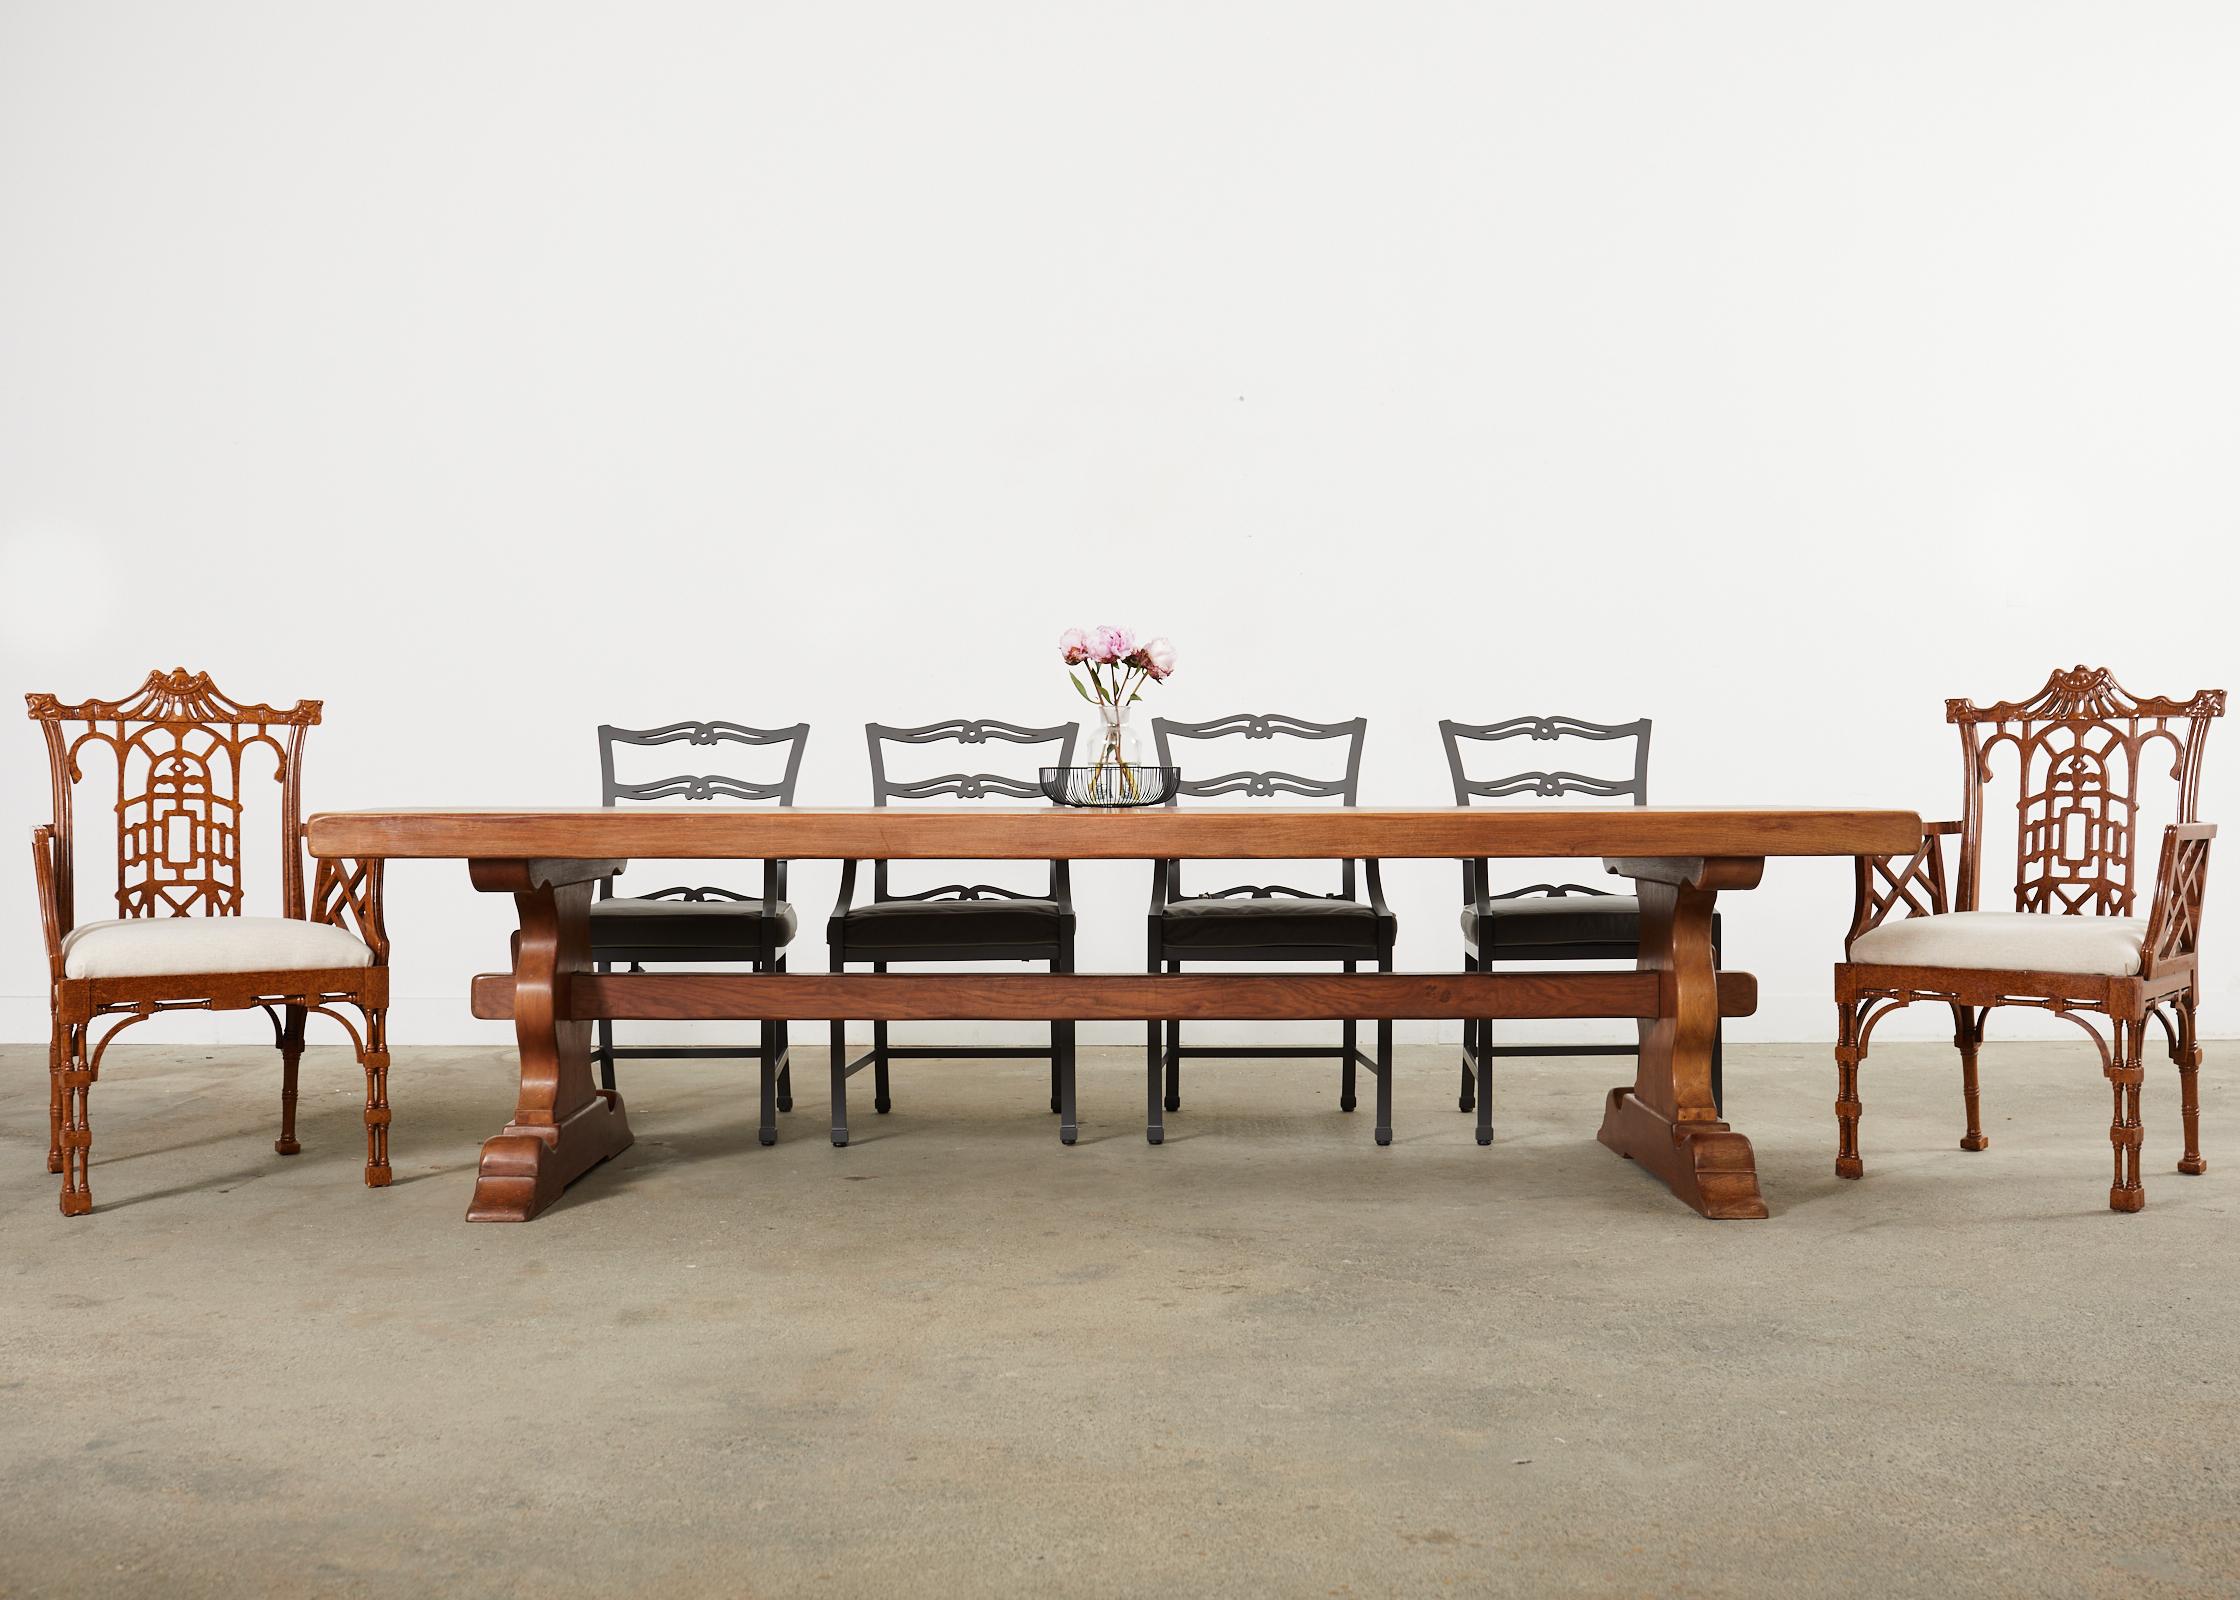 Massive country French provincial style farmhouse dining table from oak timbers. The large table features a 3.5 inch thick top of solid oak. The top is supported by a trestle base with baluster form legs conjoined by exposed mortise and tenon